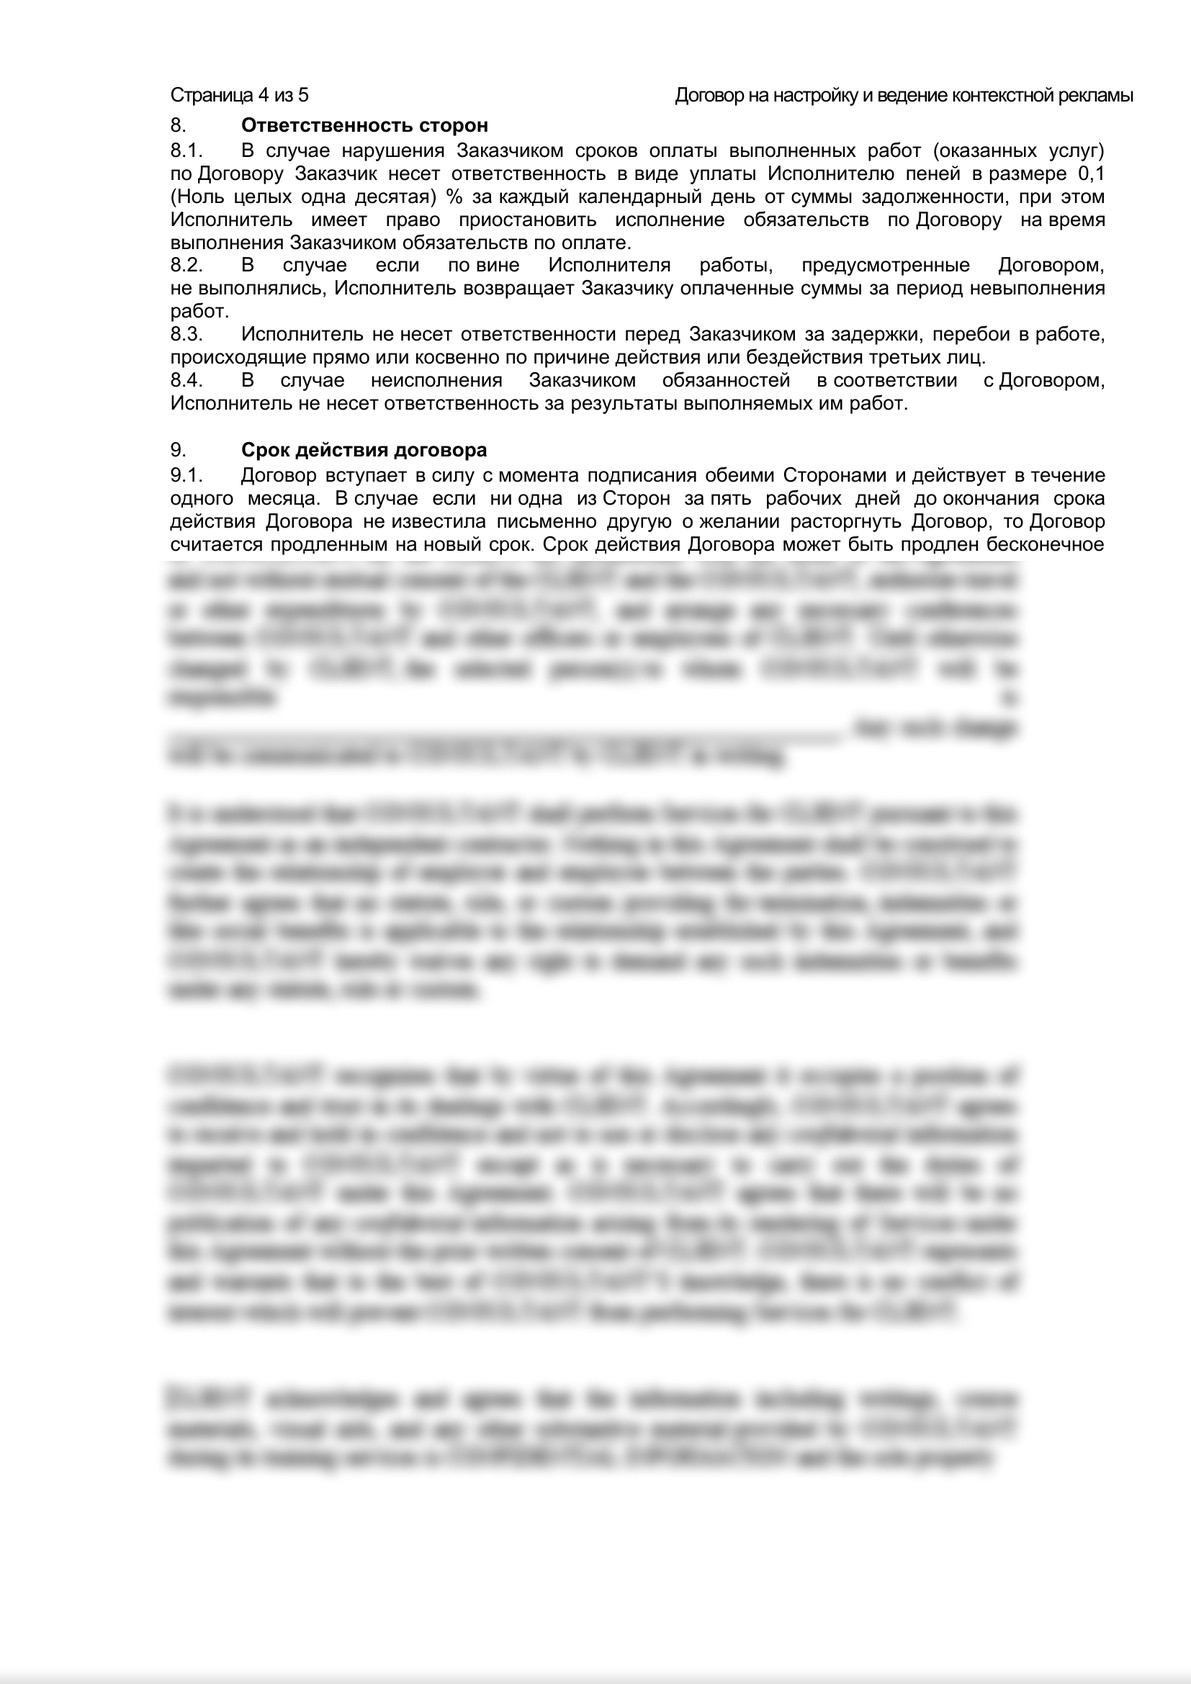 Contract for setting up and maintaining contextual advertising-3